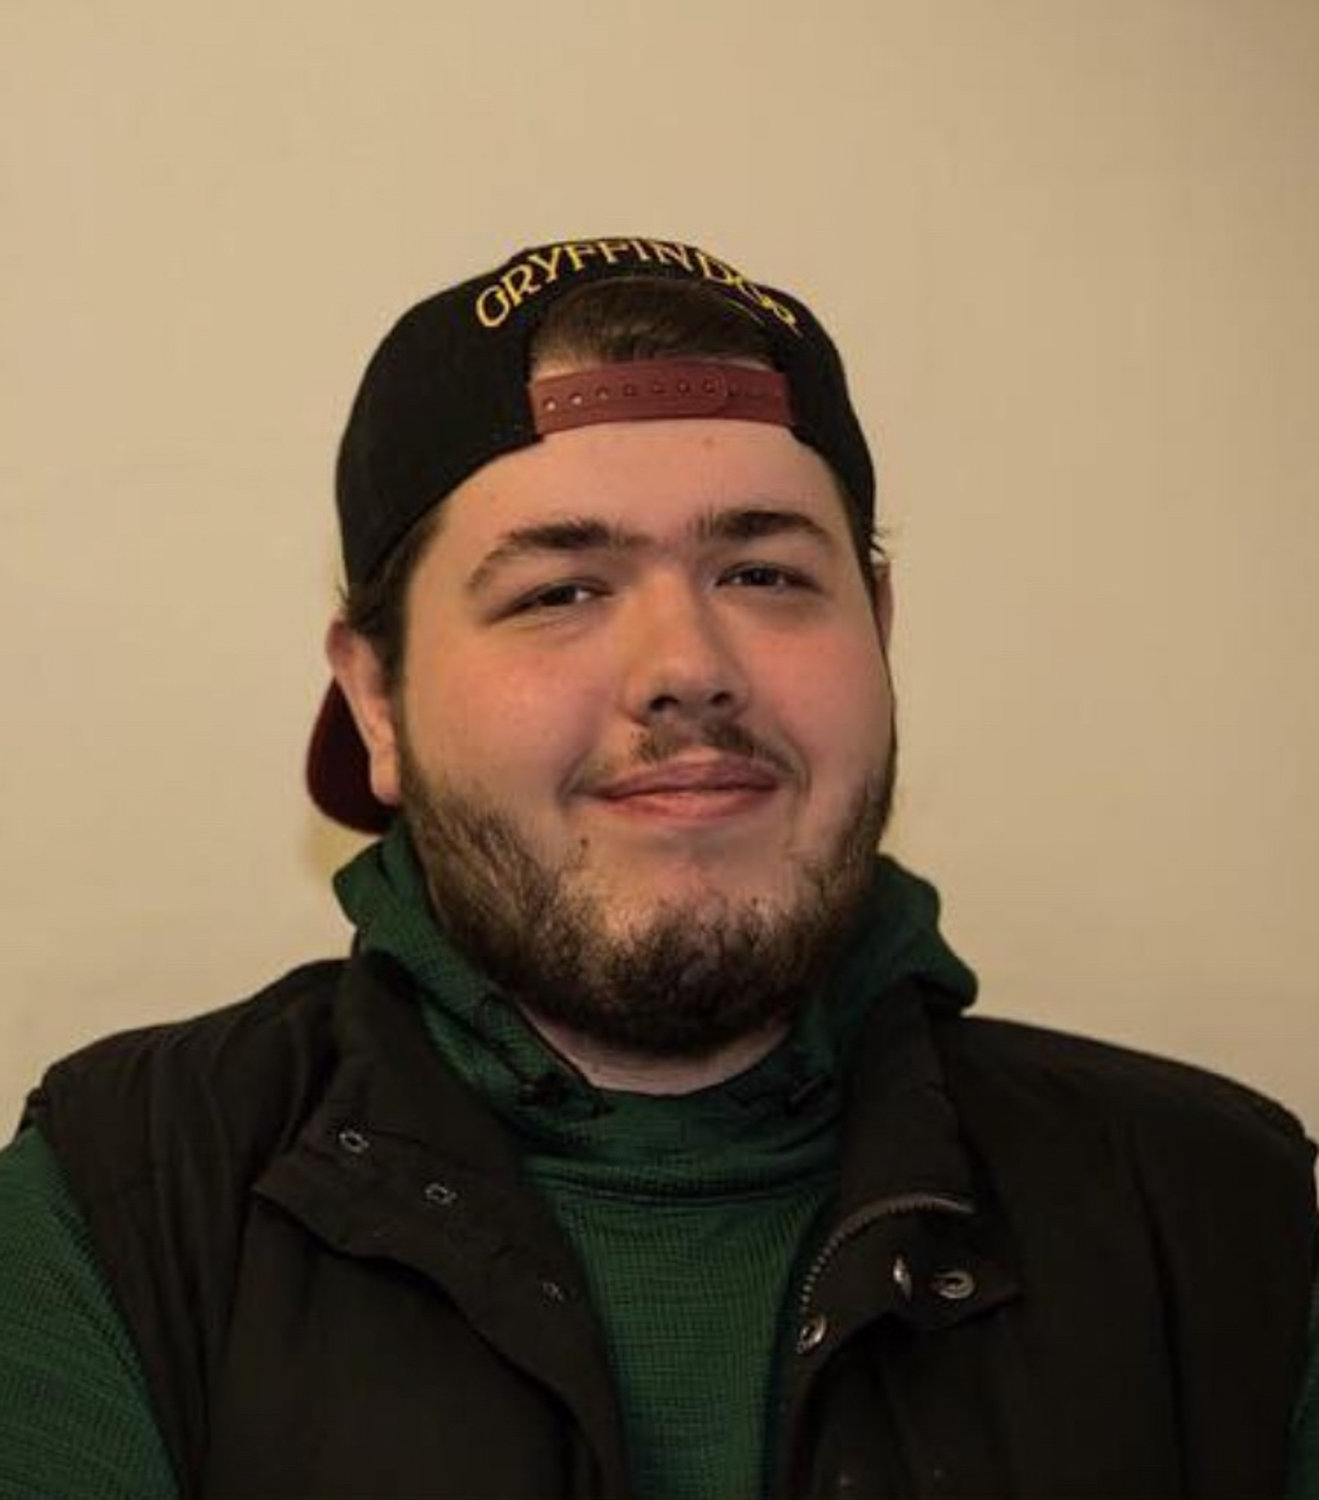 Moving out was almost the least of Ryan Askin’s problems. The Manhattan College senior was sad about the abrupt end to his life on campus.